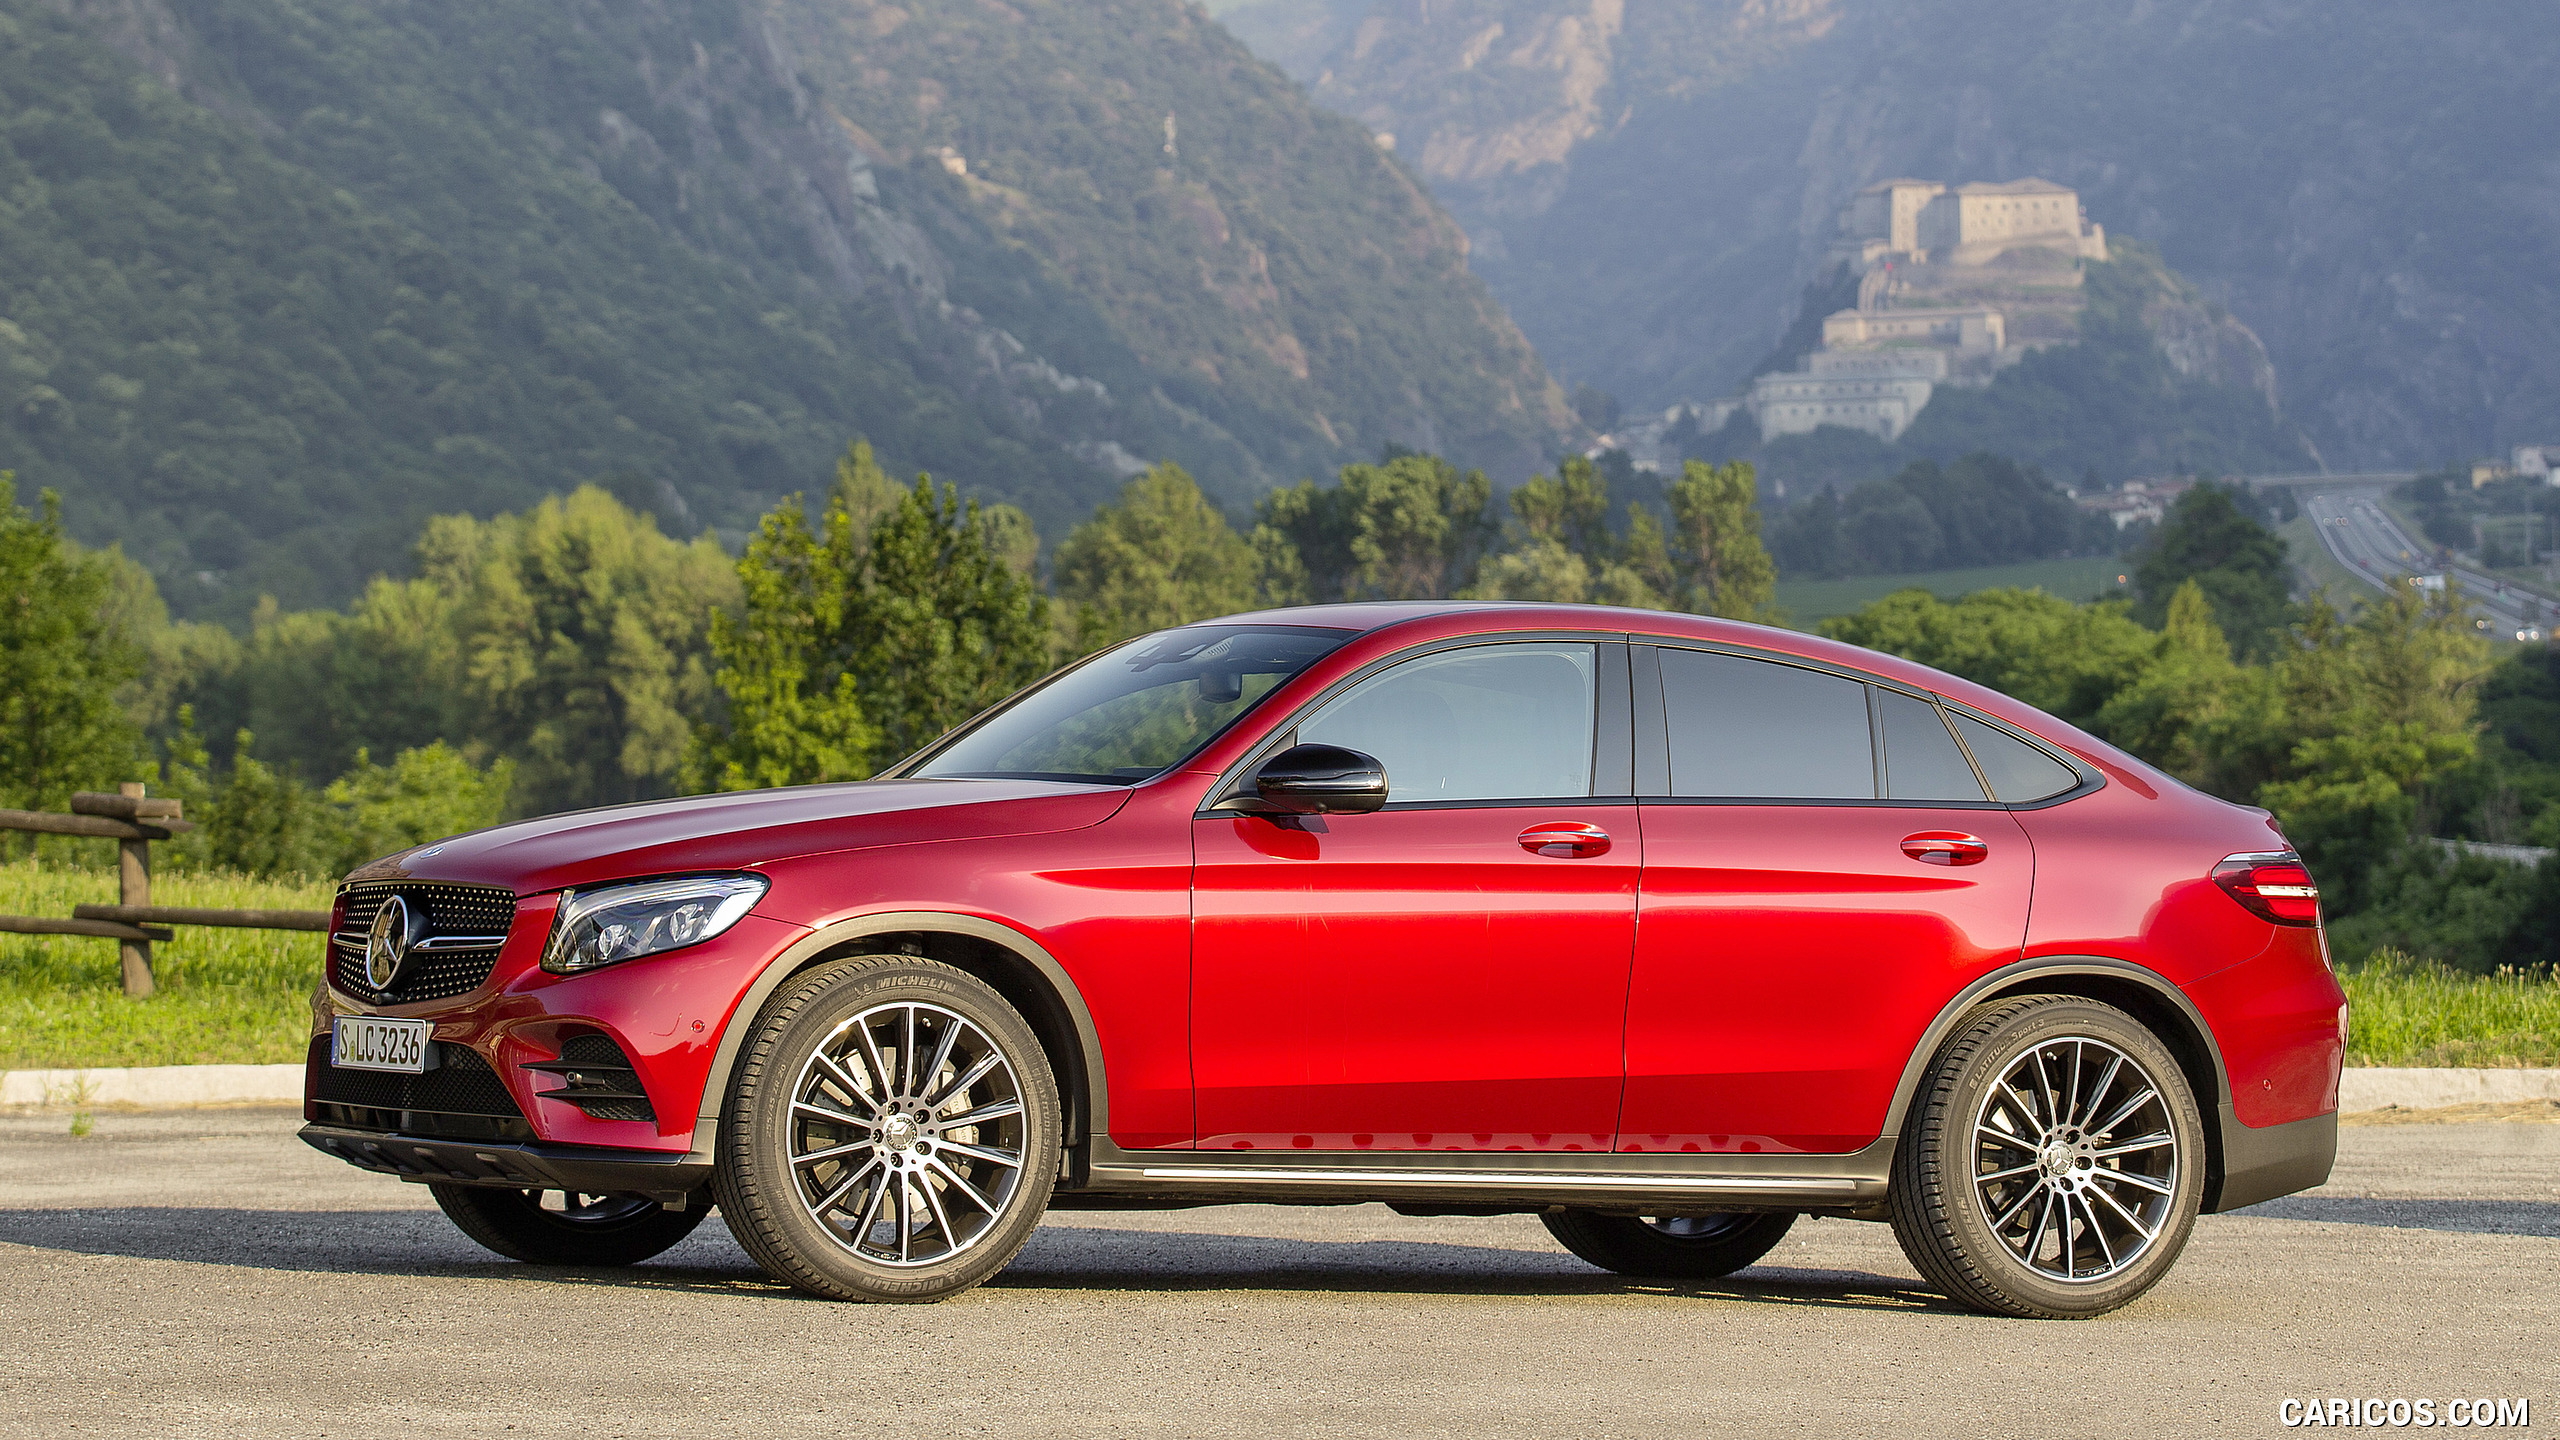 2017 Mercedes-Benz GLC 350 d Coupe Color: Hyacinth Red) Side | Caricos